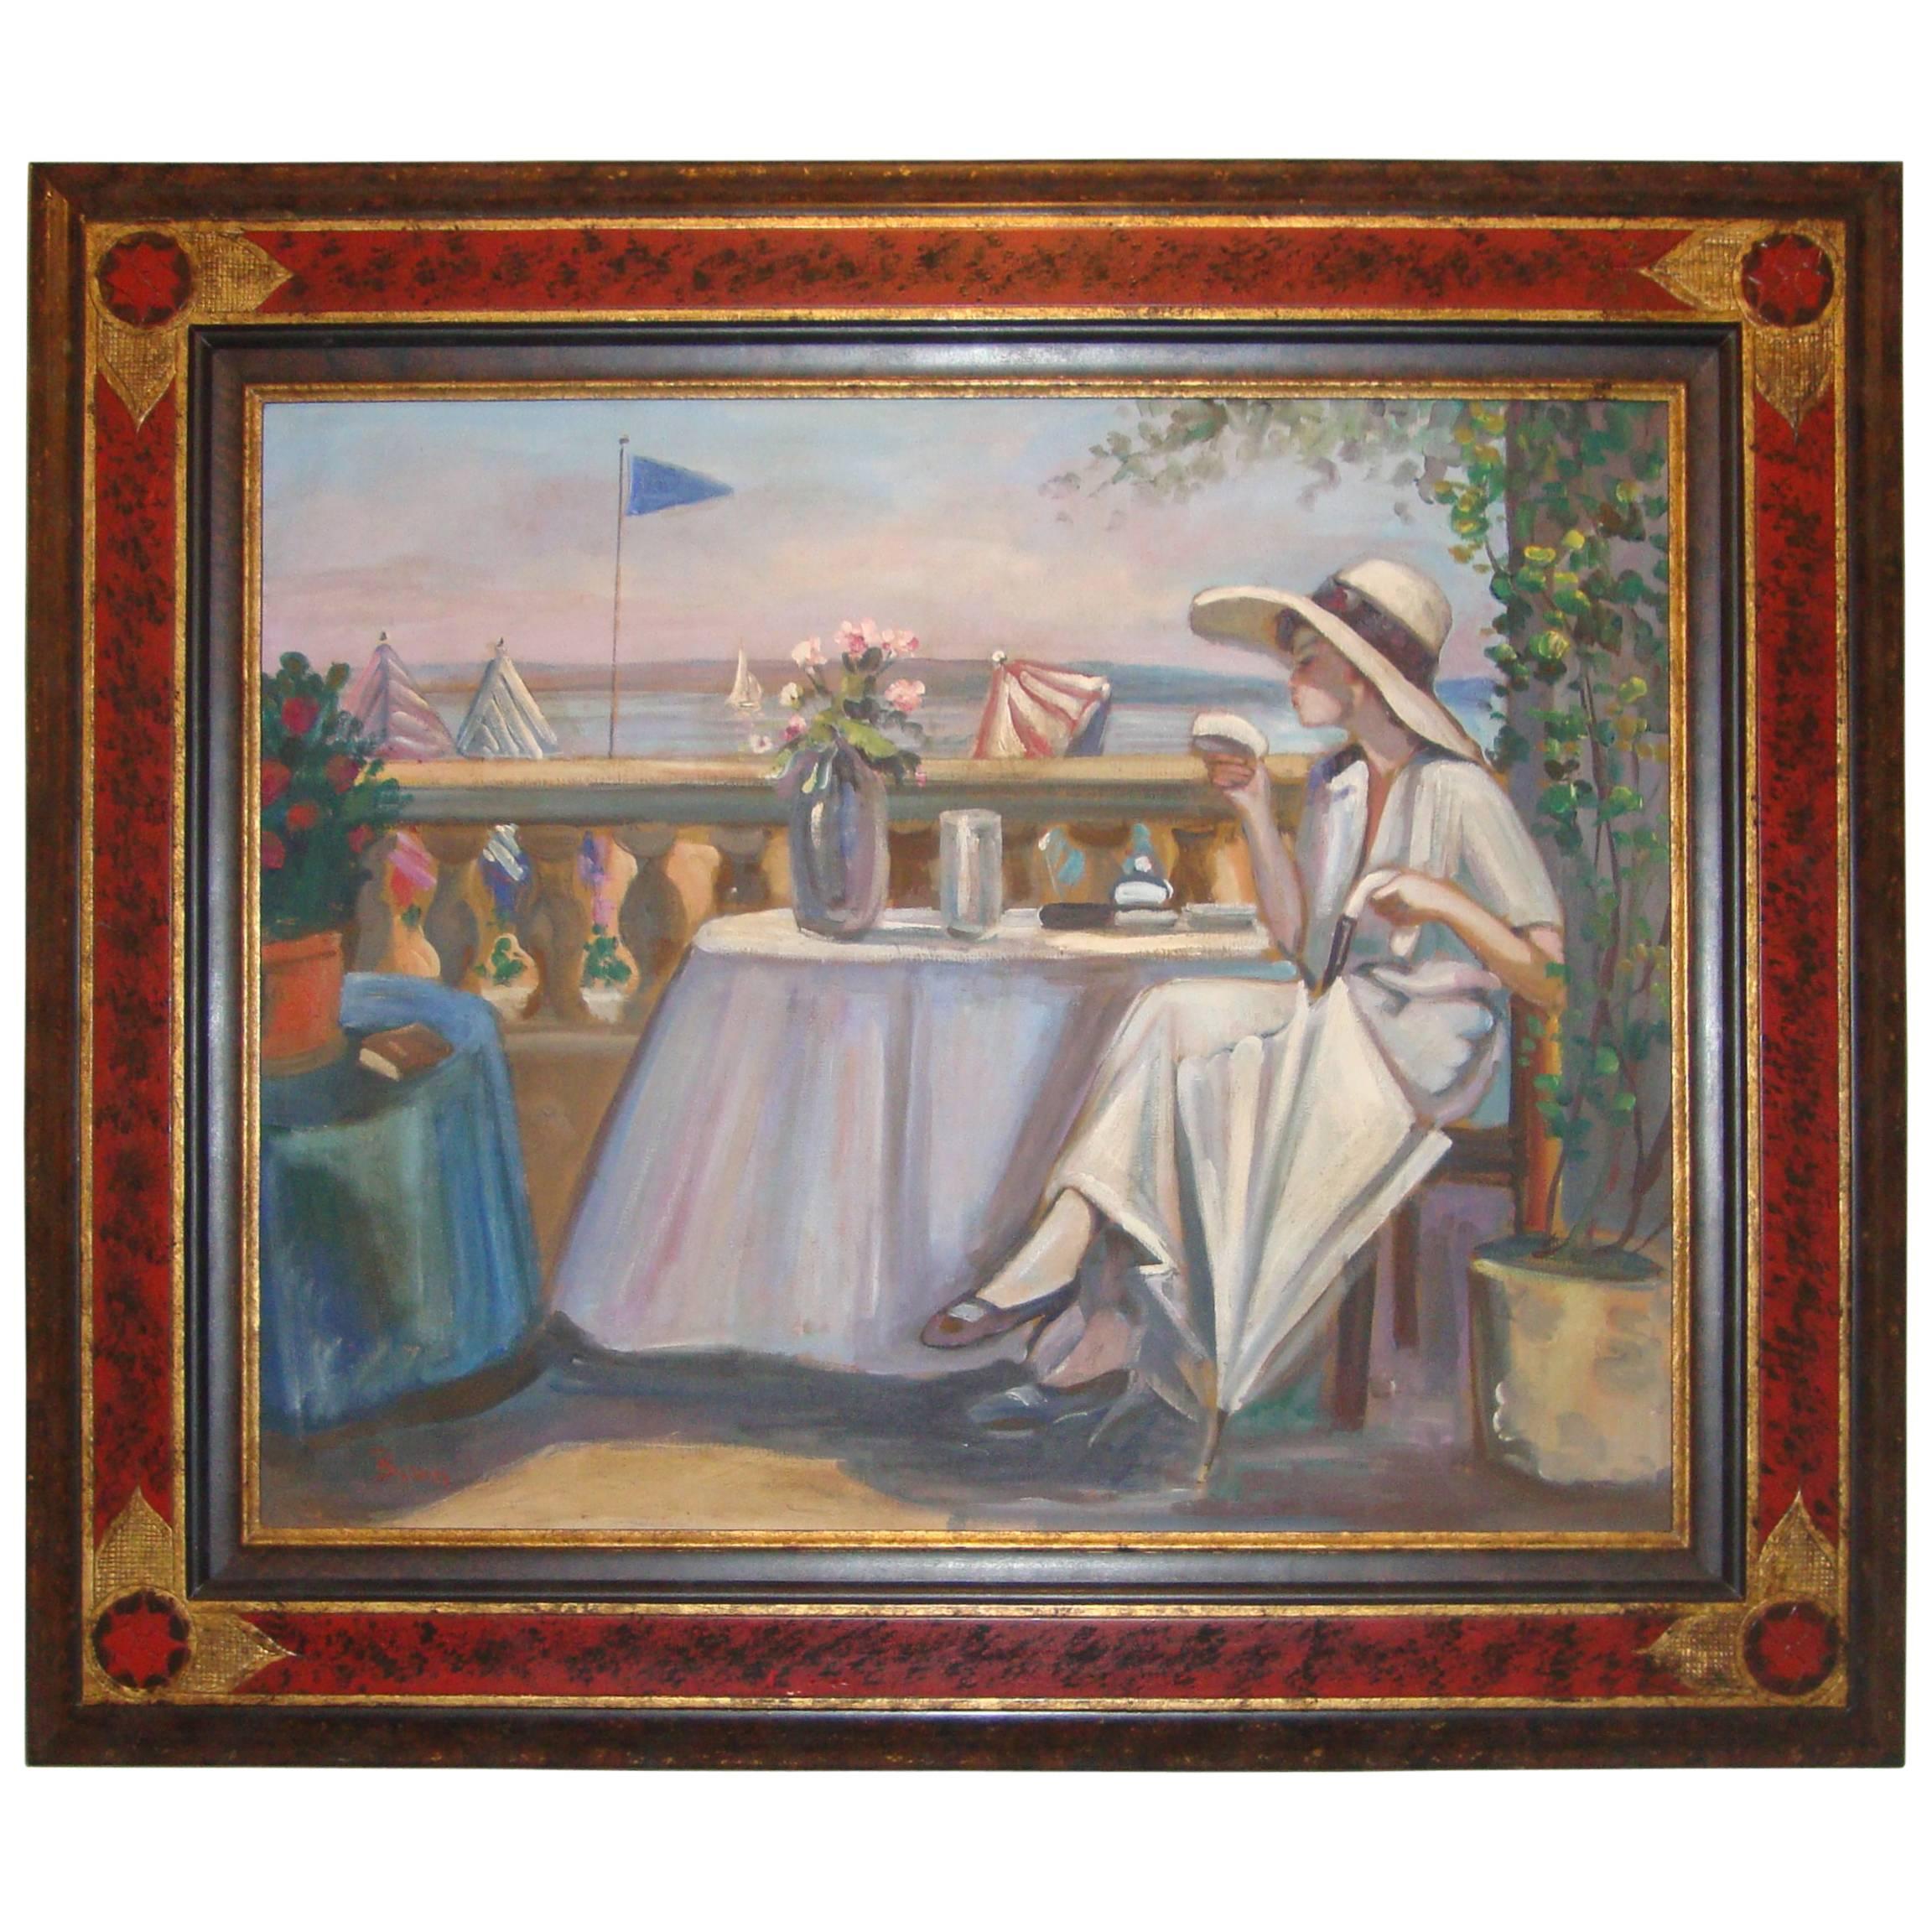 Oil On Canvas Woman by the Sea by Baton HIghly Decorative Chinoiserie Frame